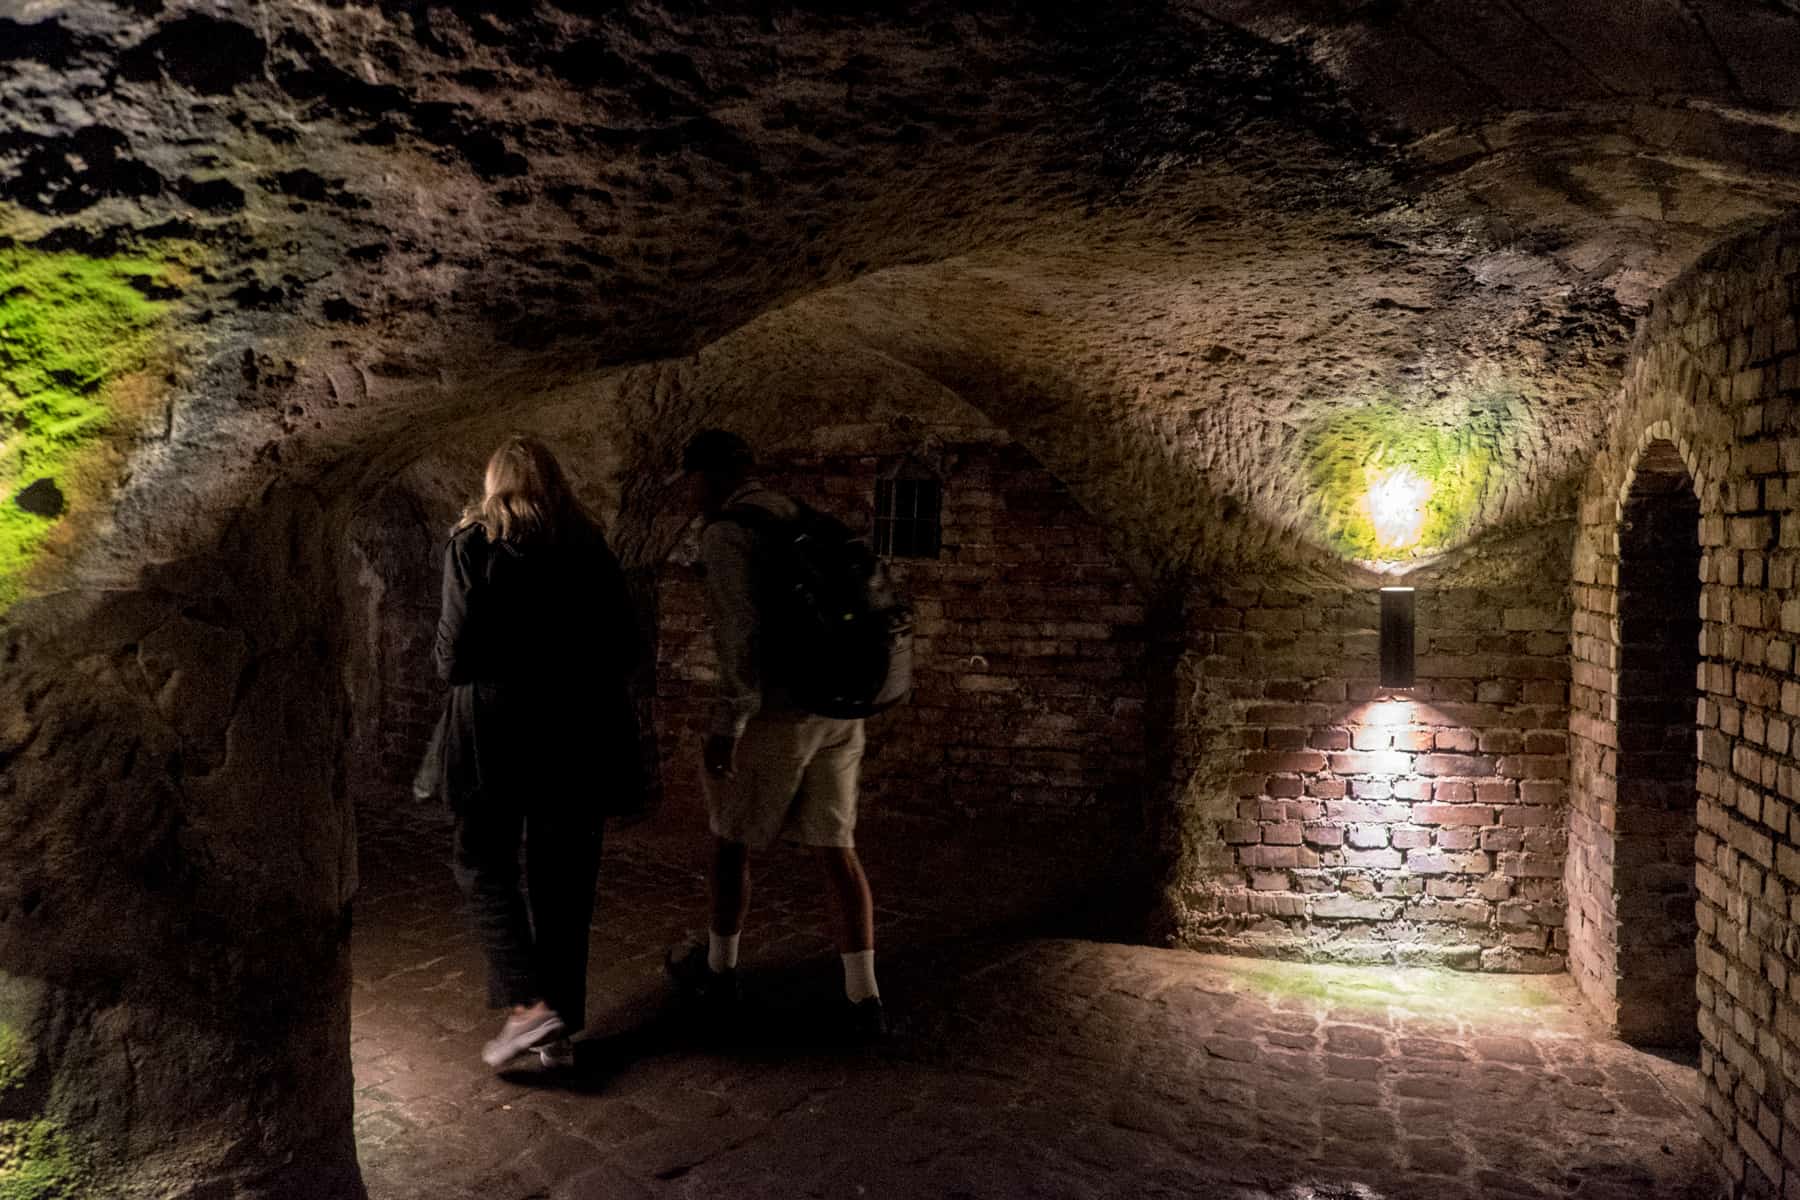 Two tourists walking through the beer cellar caves in Nuremberg as part of a tour